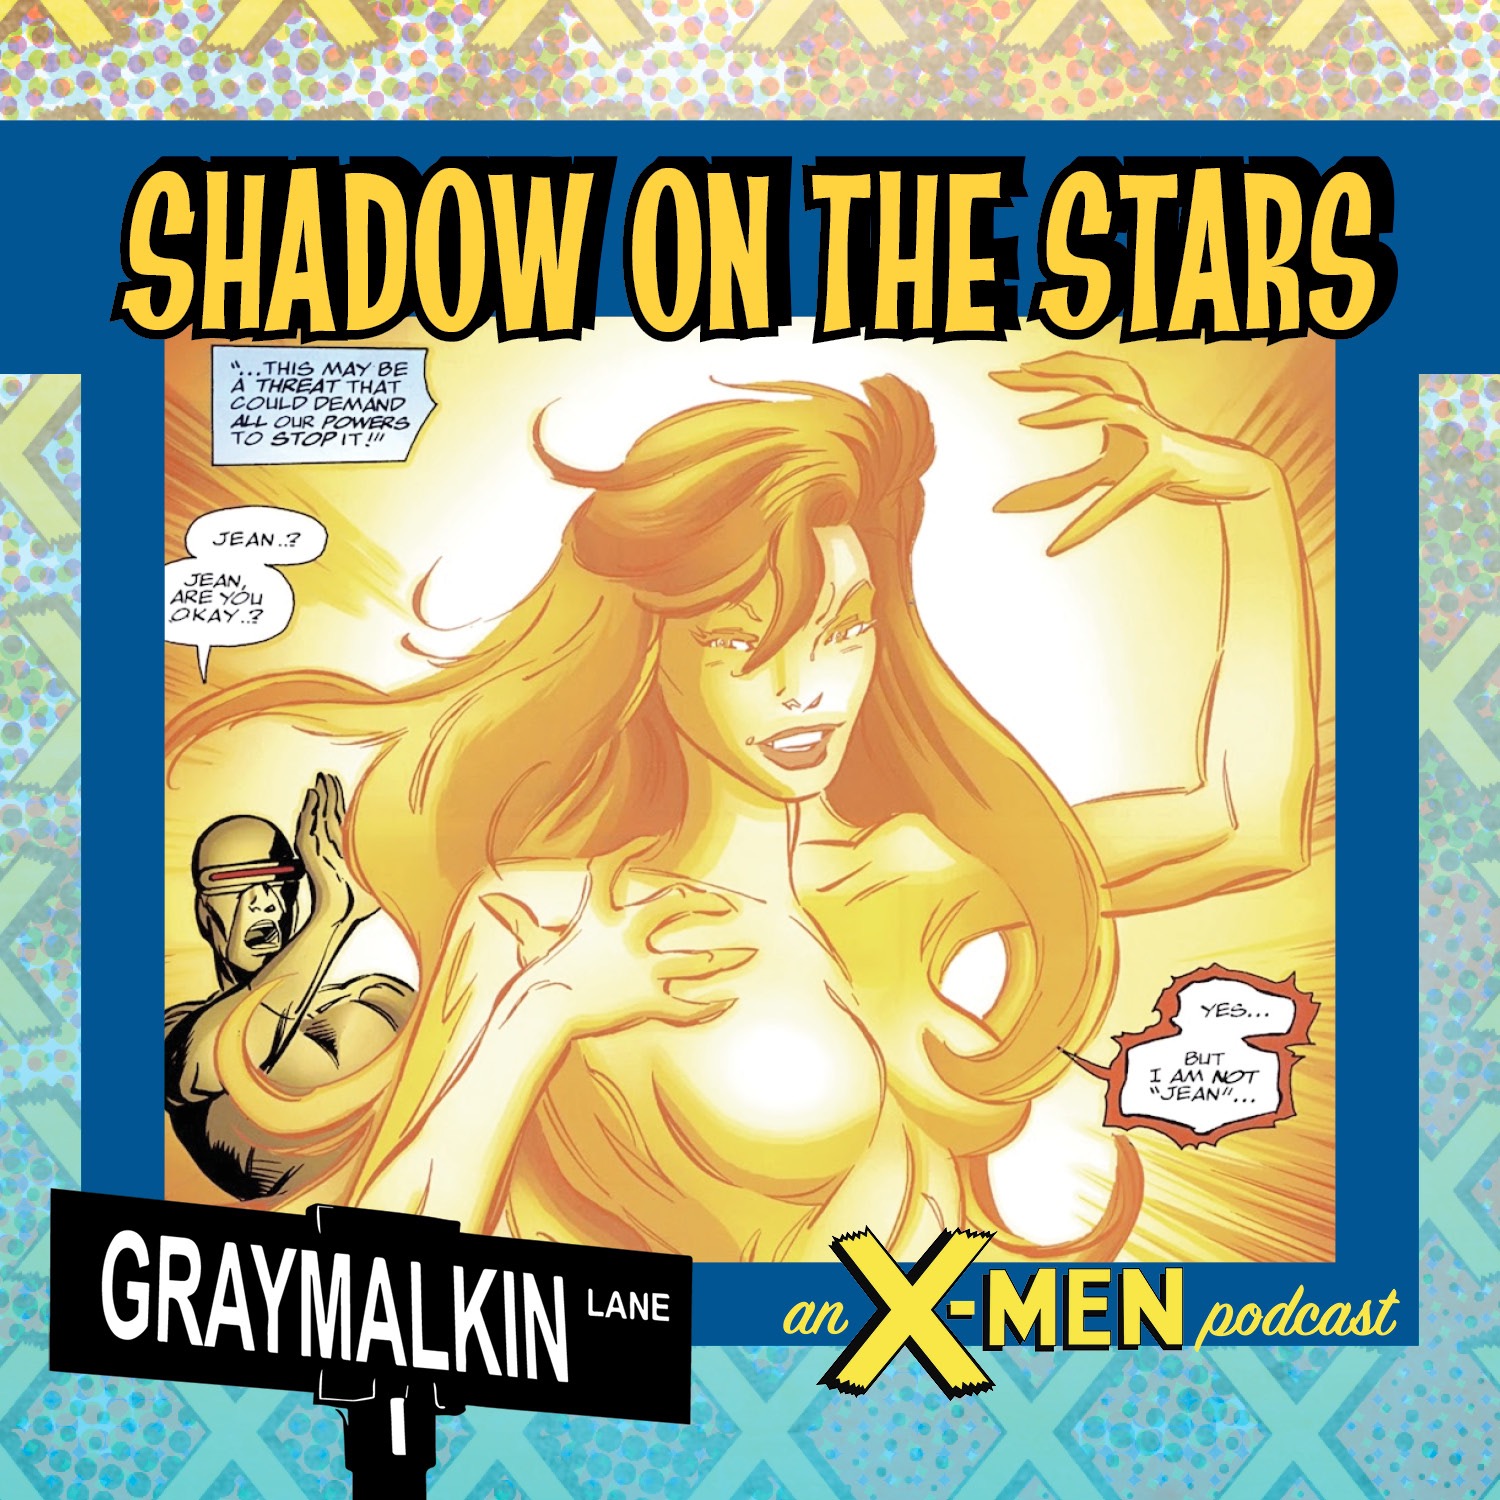 X-Men the Hidden Years 8-9: Shadow on the Stars! Featuring Erica Schultz! With Arturo Rojas, and Justin Kosmachuk!